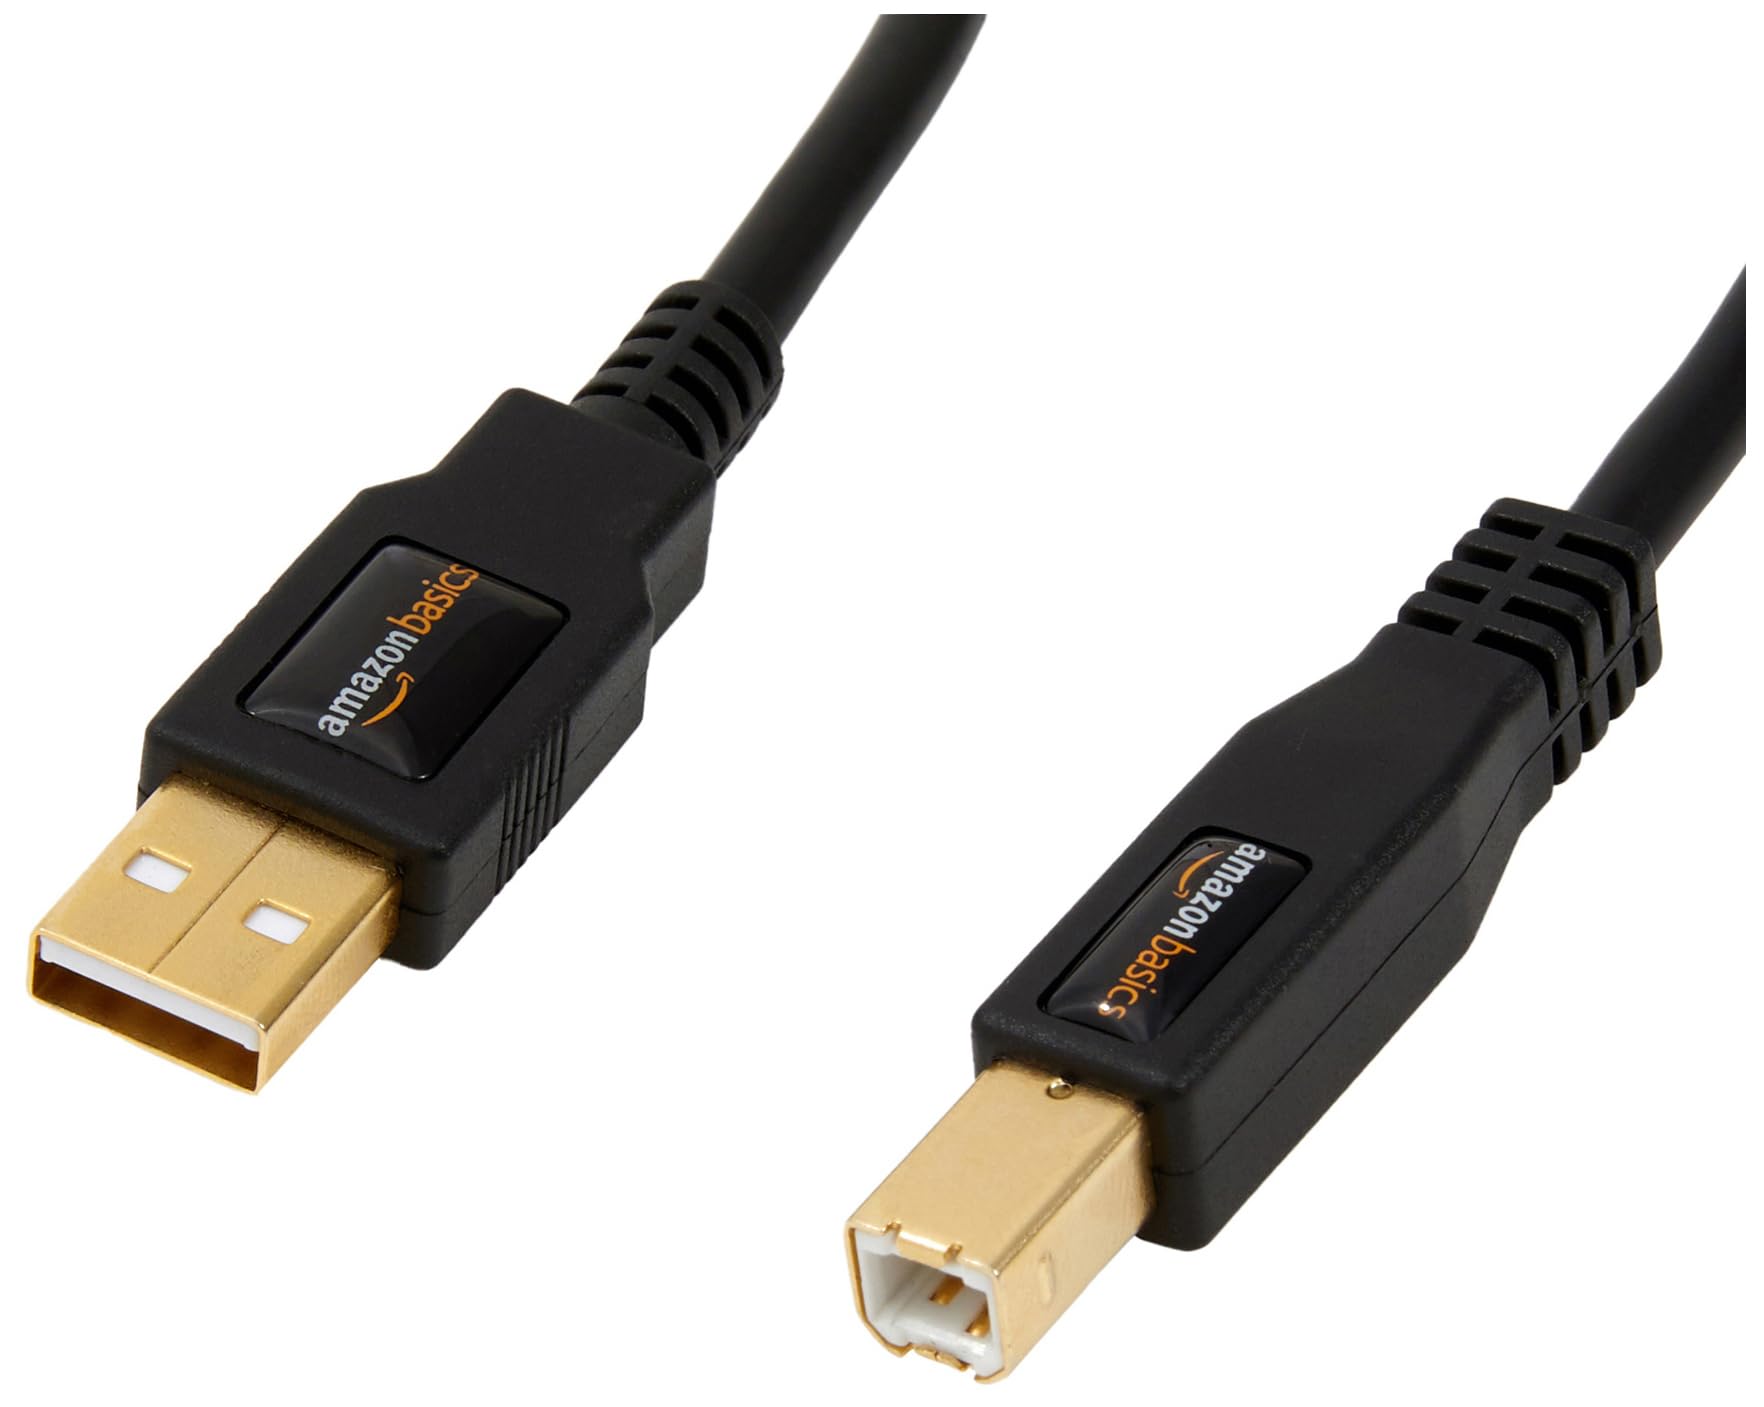 Unplug the USB cable from the printer and the computer.
Inspect the cable for any damage or fraying.